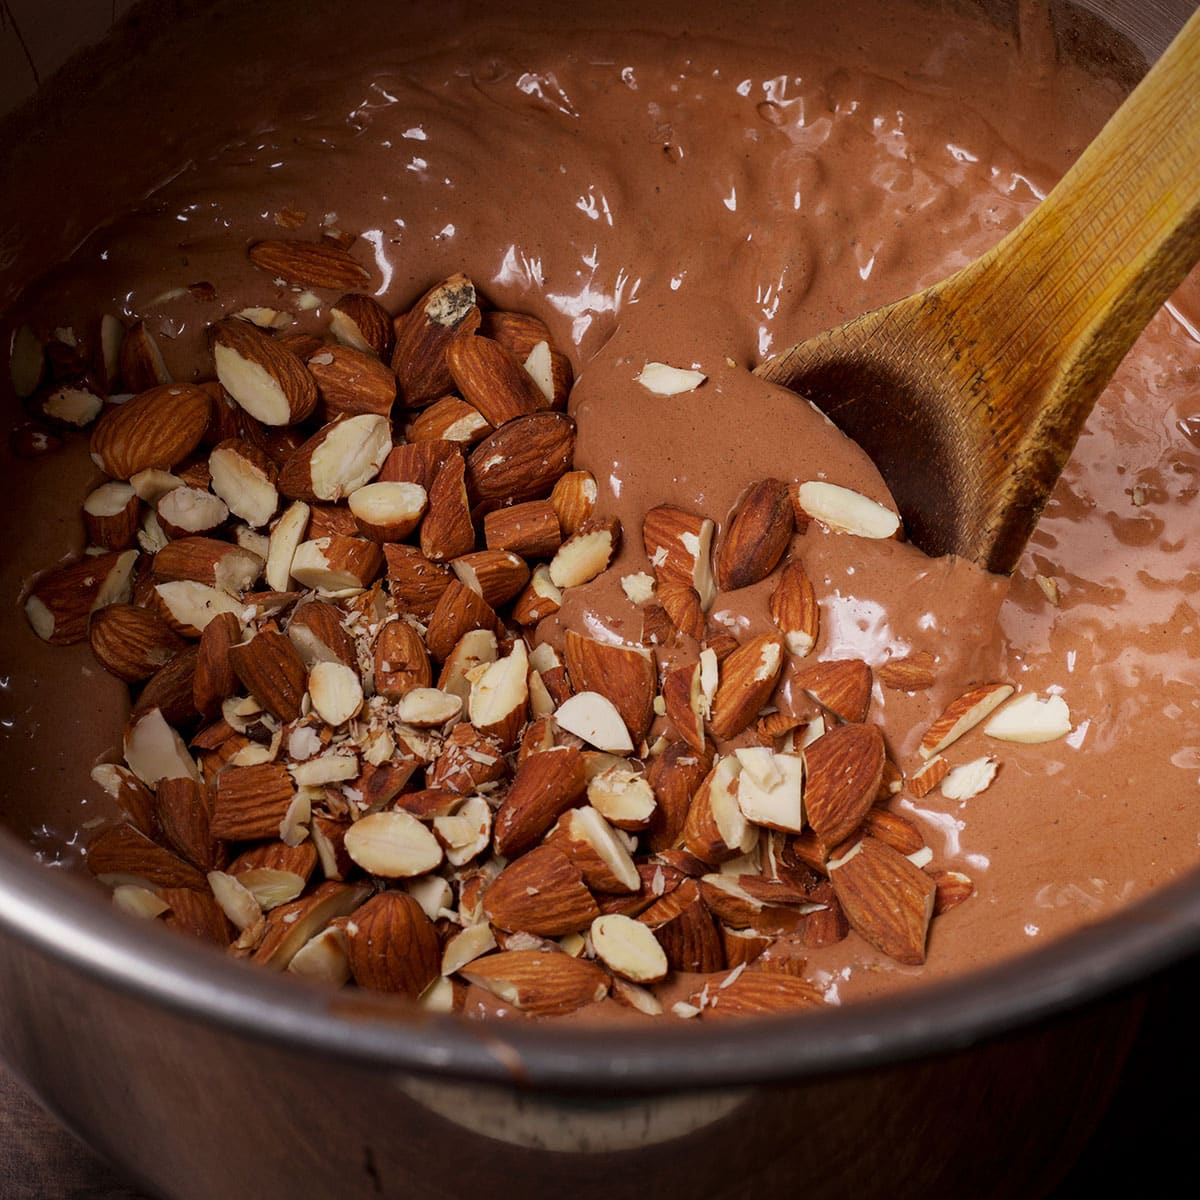 Using a wooden spoon to stir chopped almonds into chocolate pie batter.